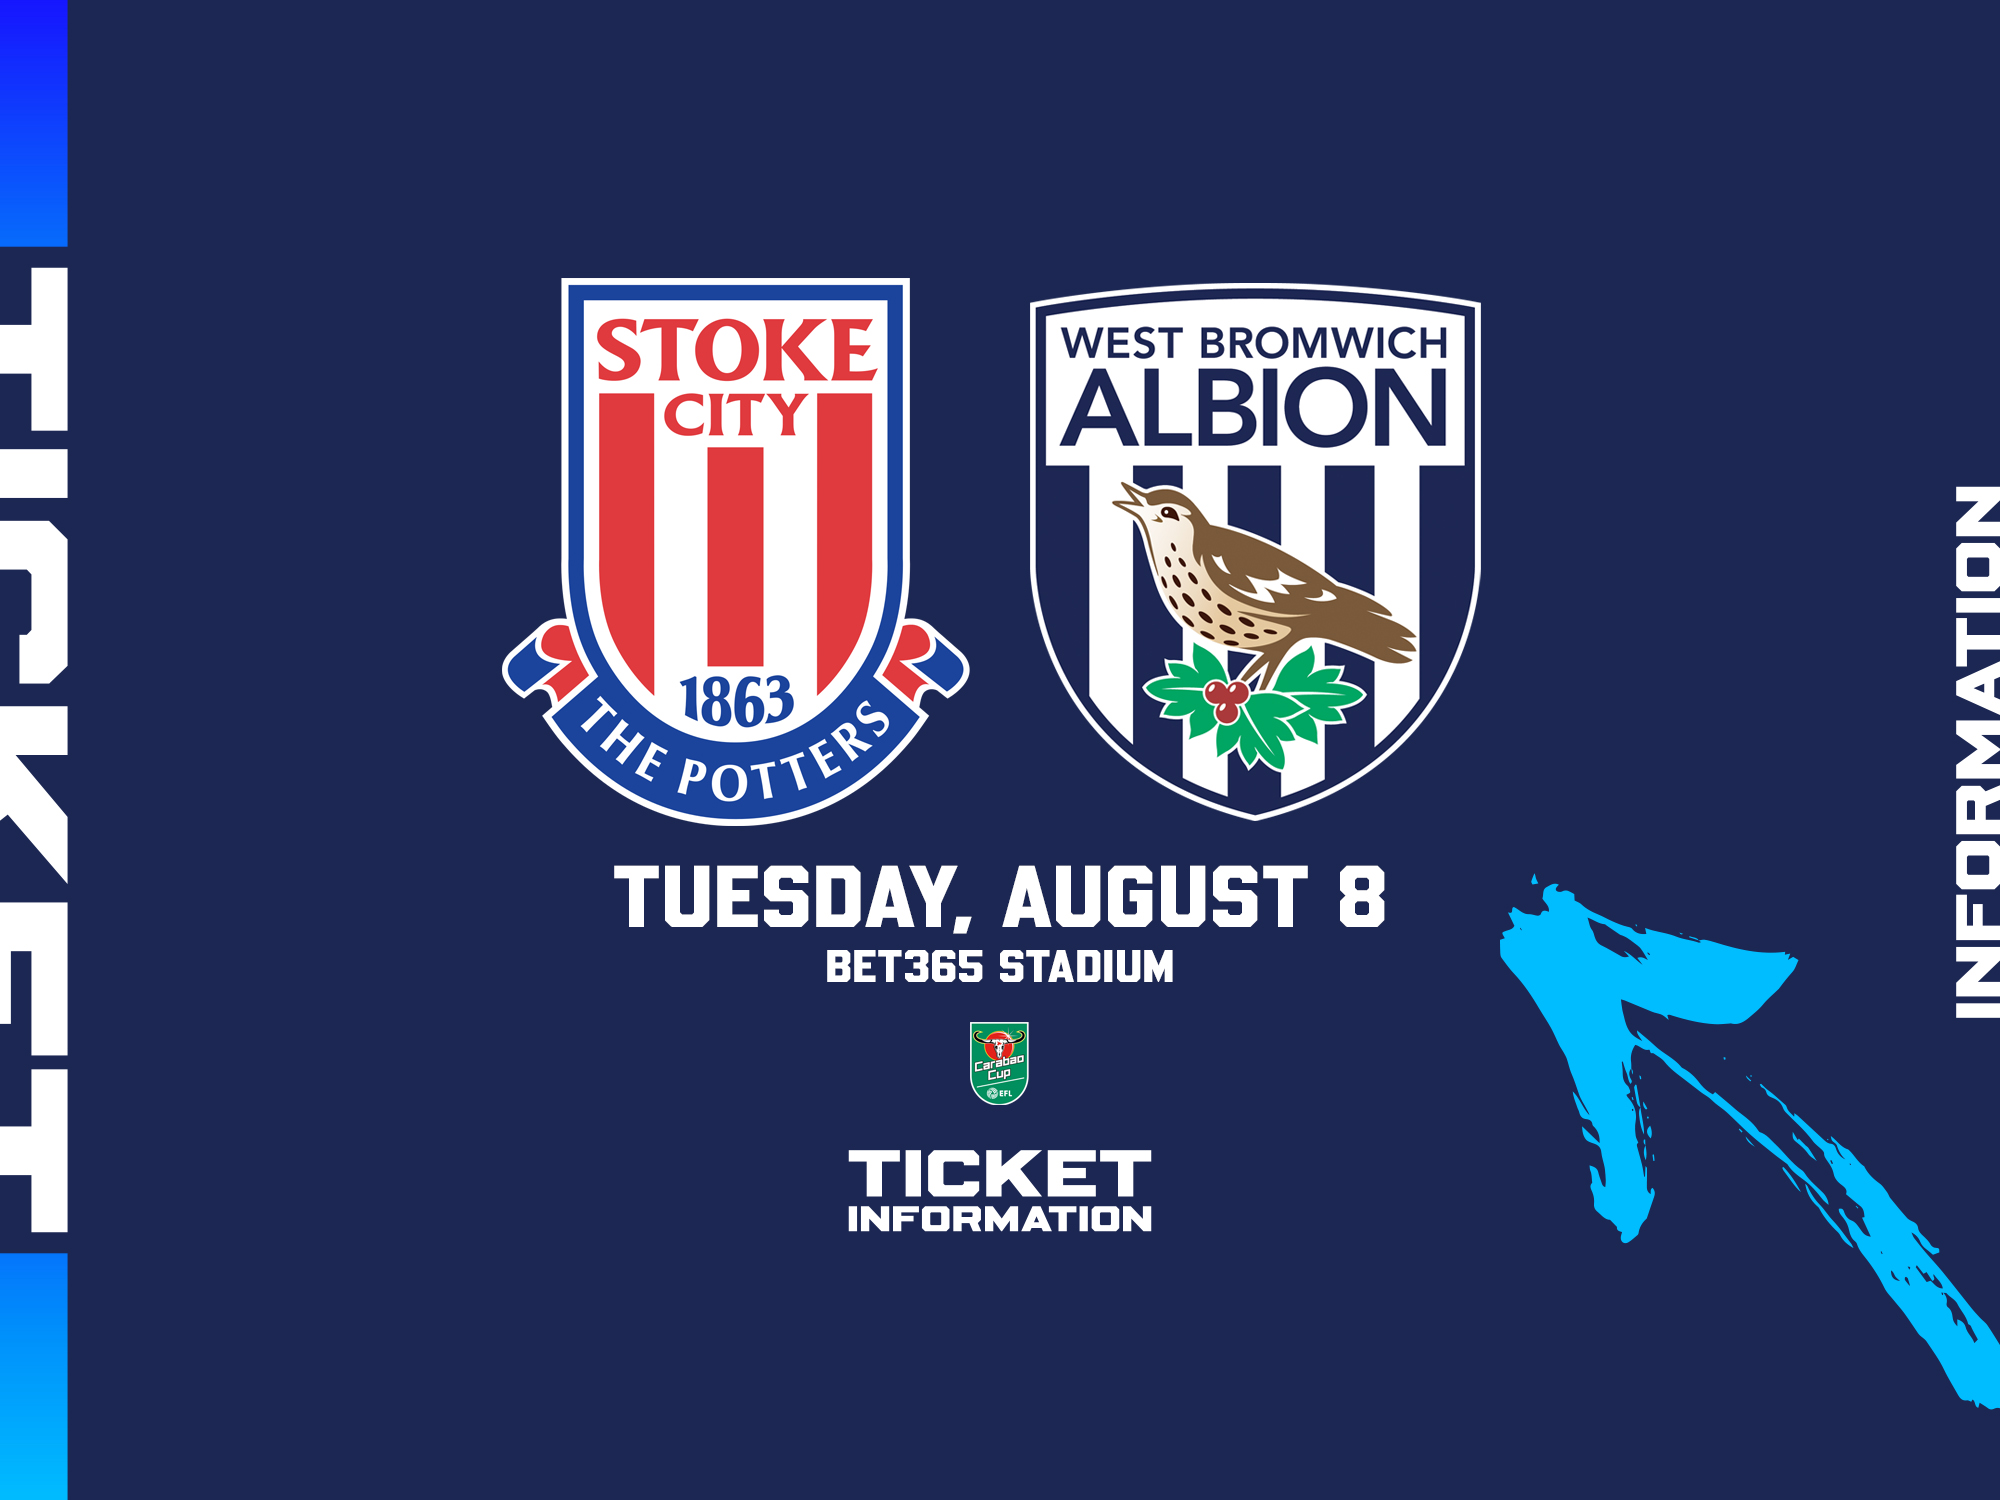 A ticket graphic displaying information for Albion's game at Stoke